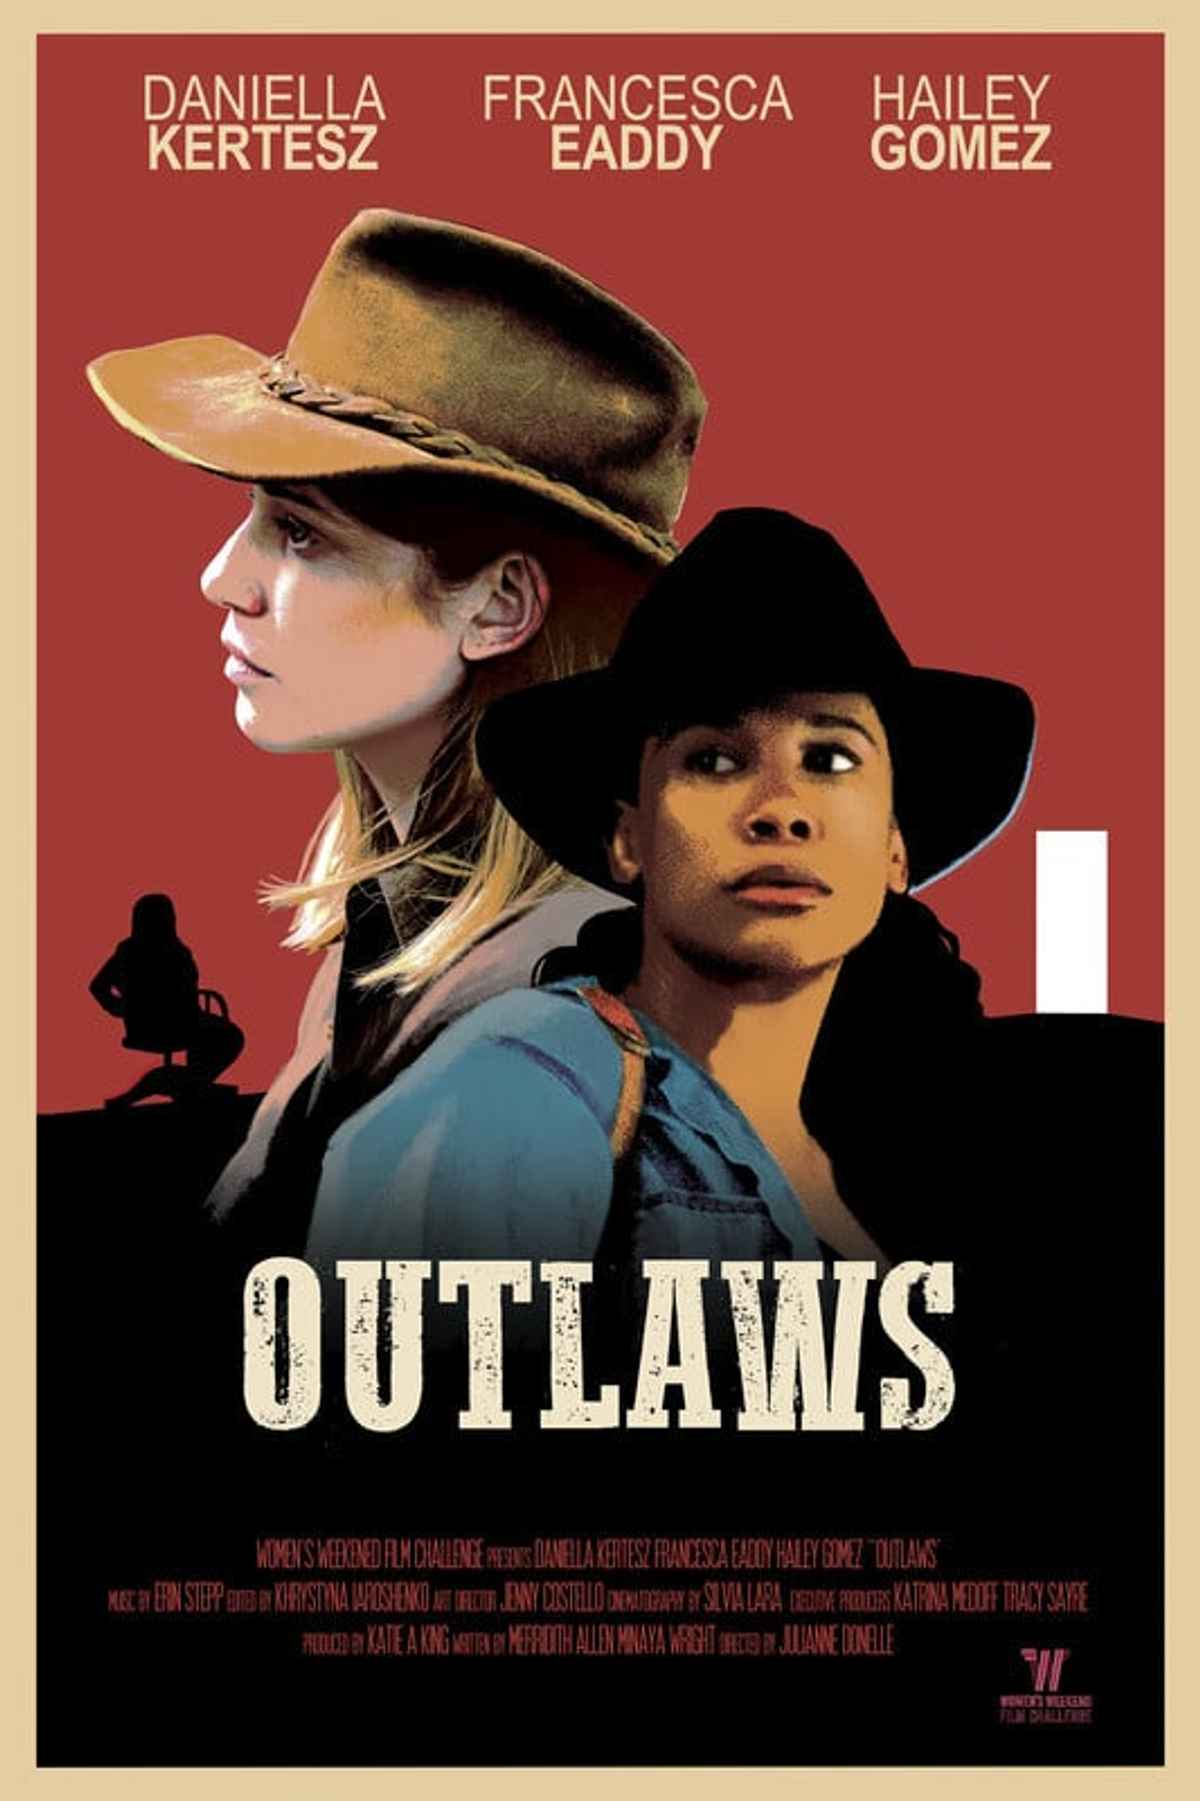 Watch Outlaws Movie Online, Release Date, Trailer, Cast and Songs